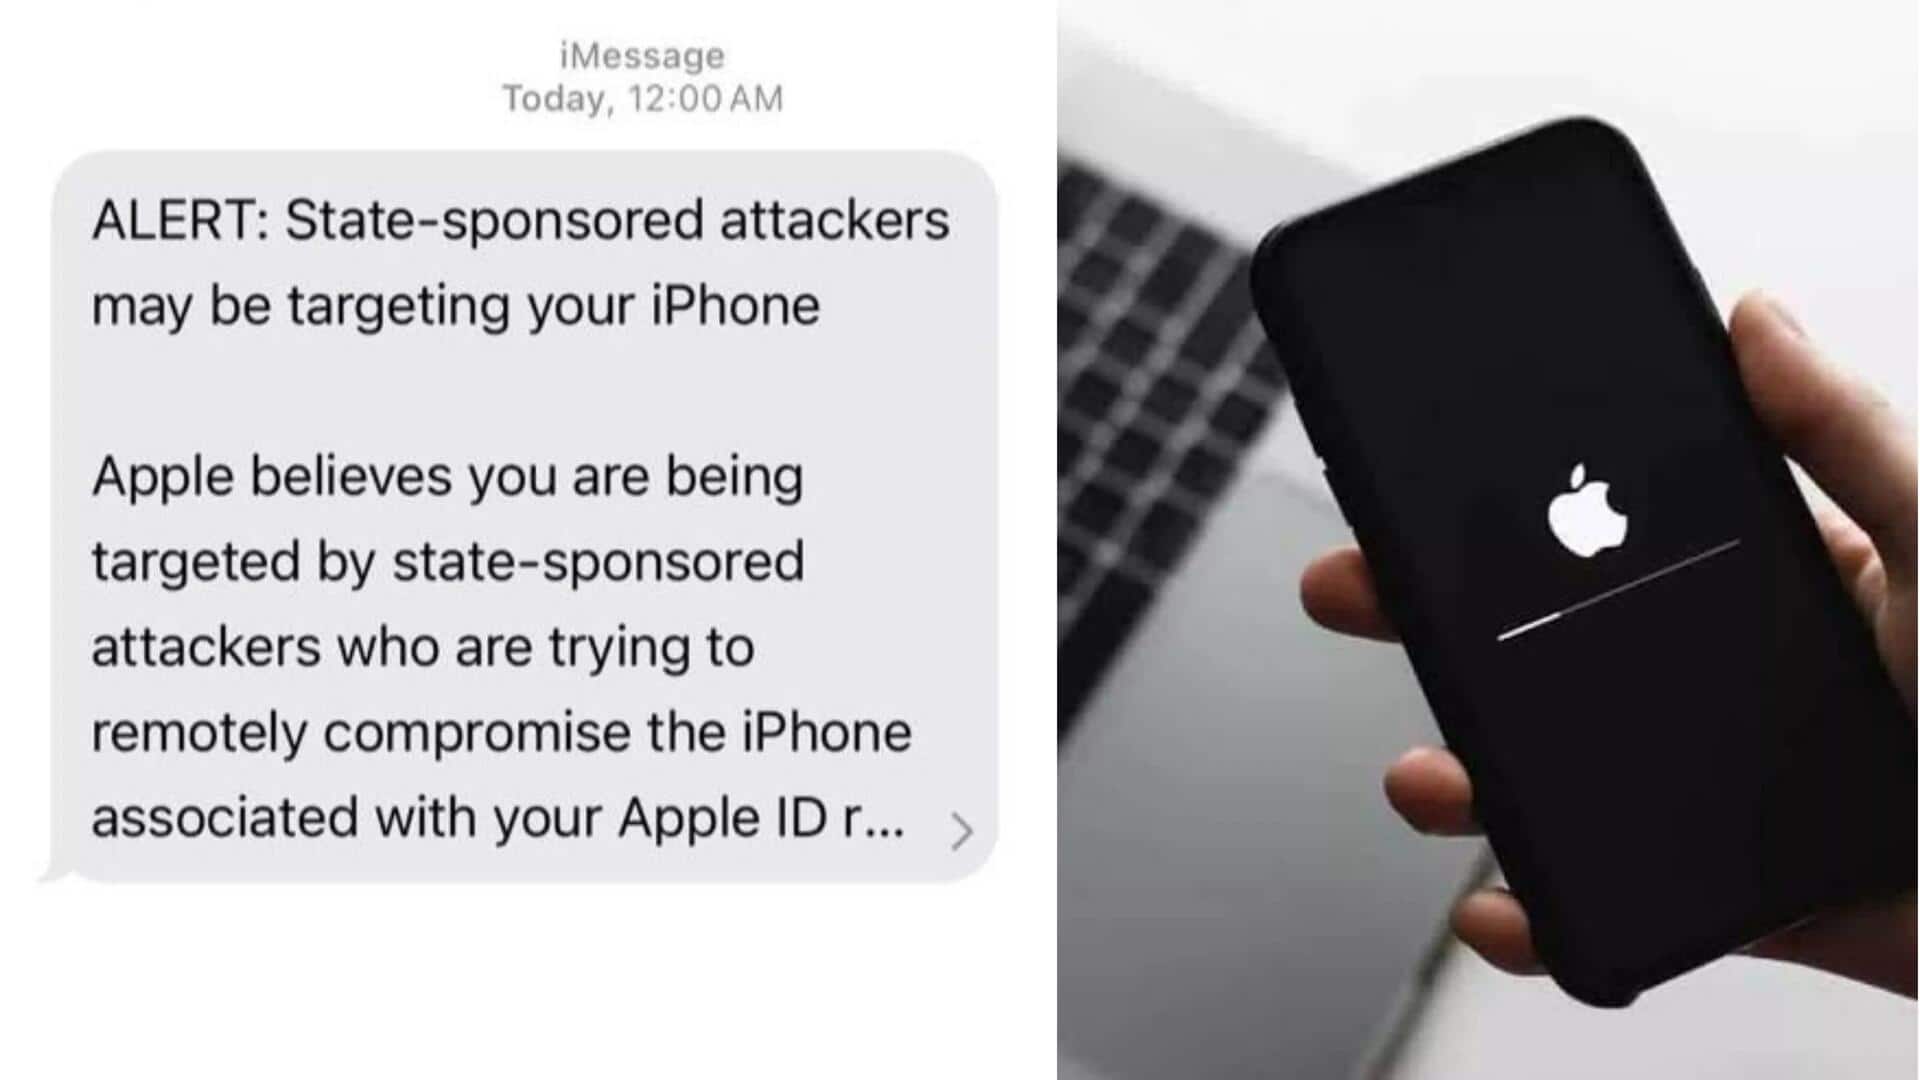 MPs receive state-sponsored iPhone hacking alert; Apple says can't verify